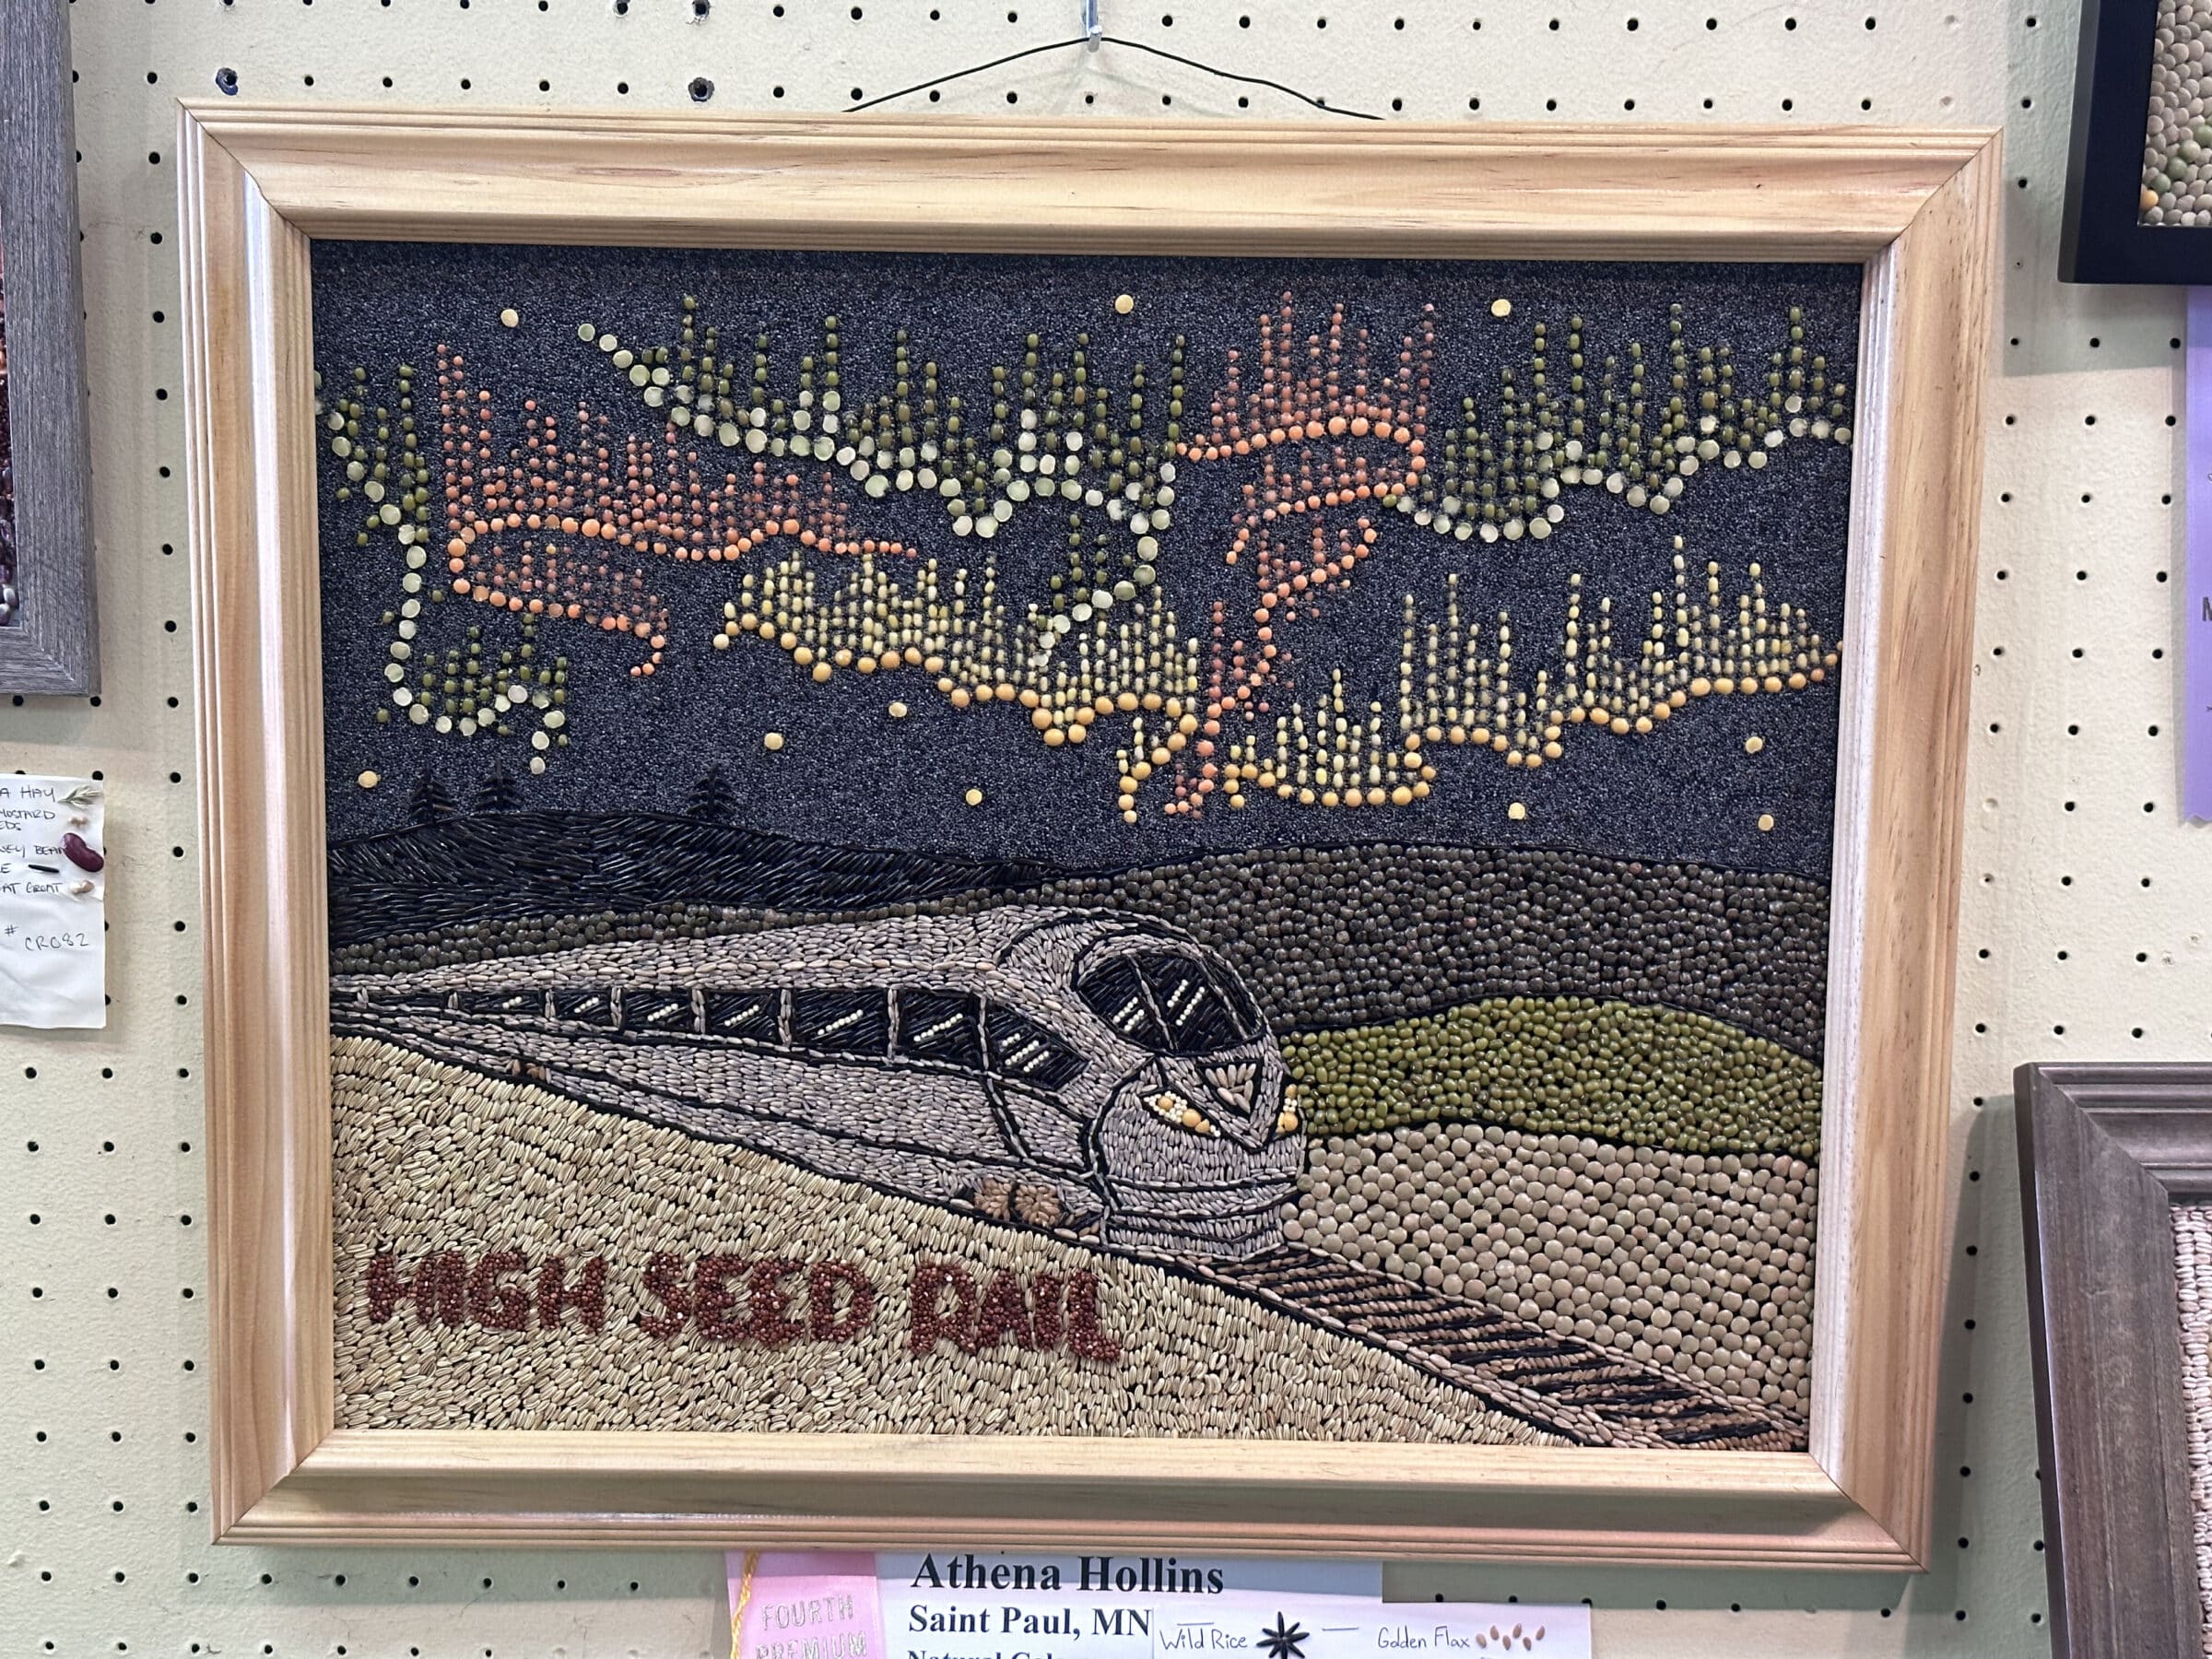 One of my favourite, aspirational pieces of seed art